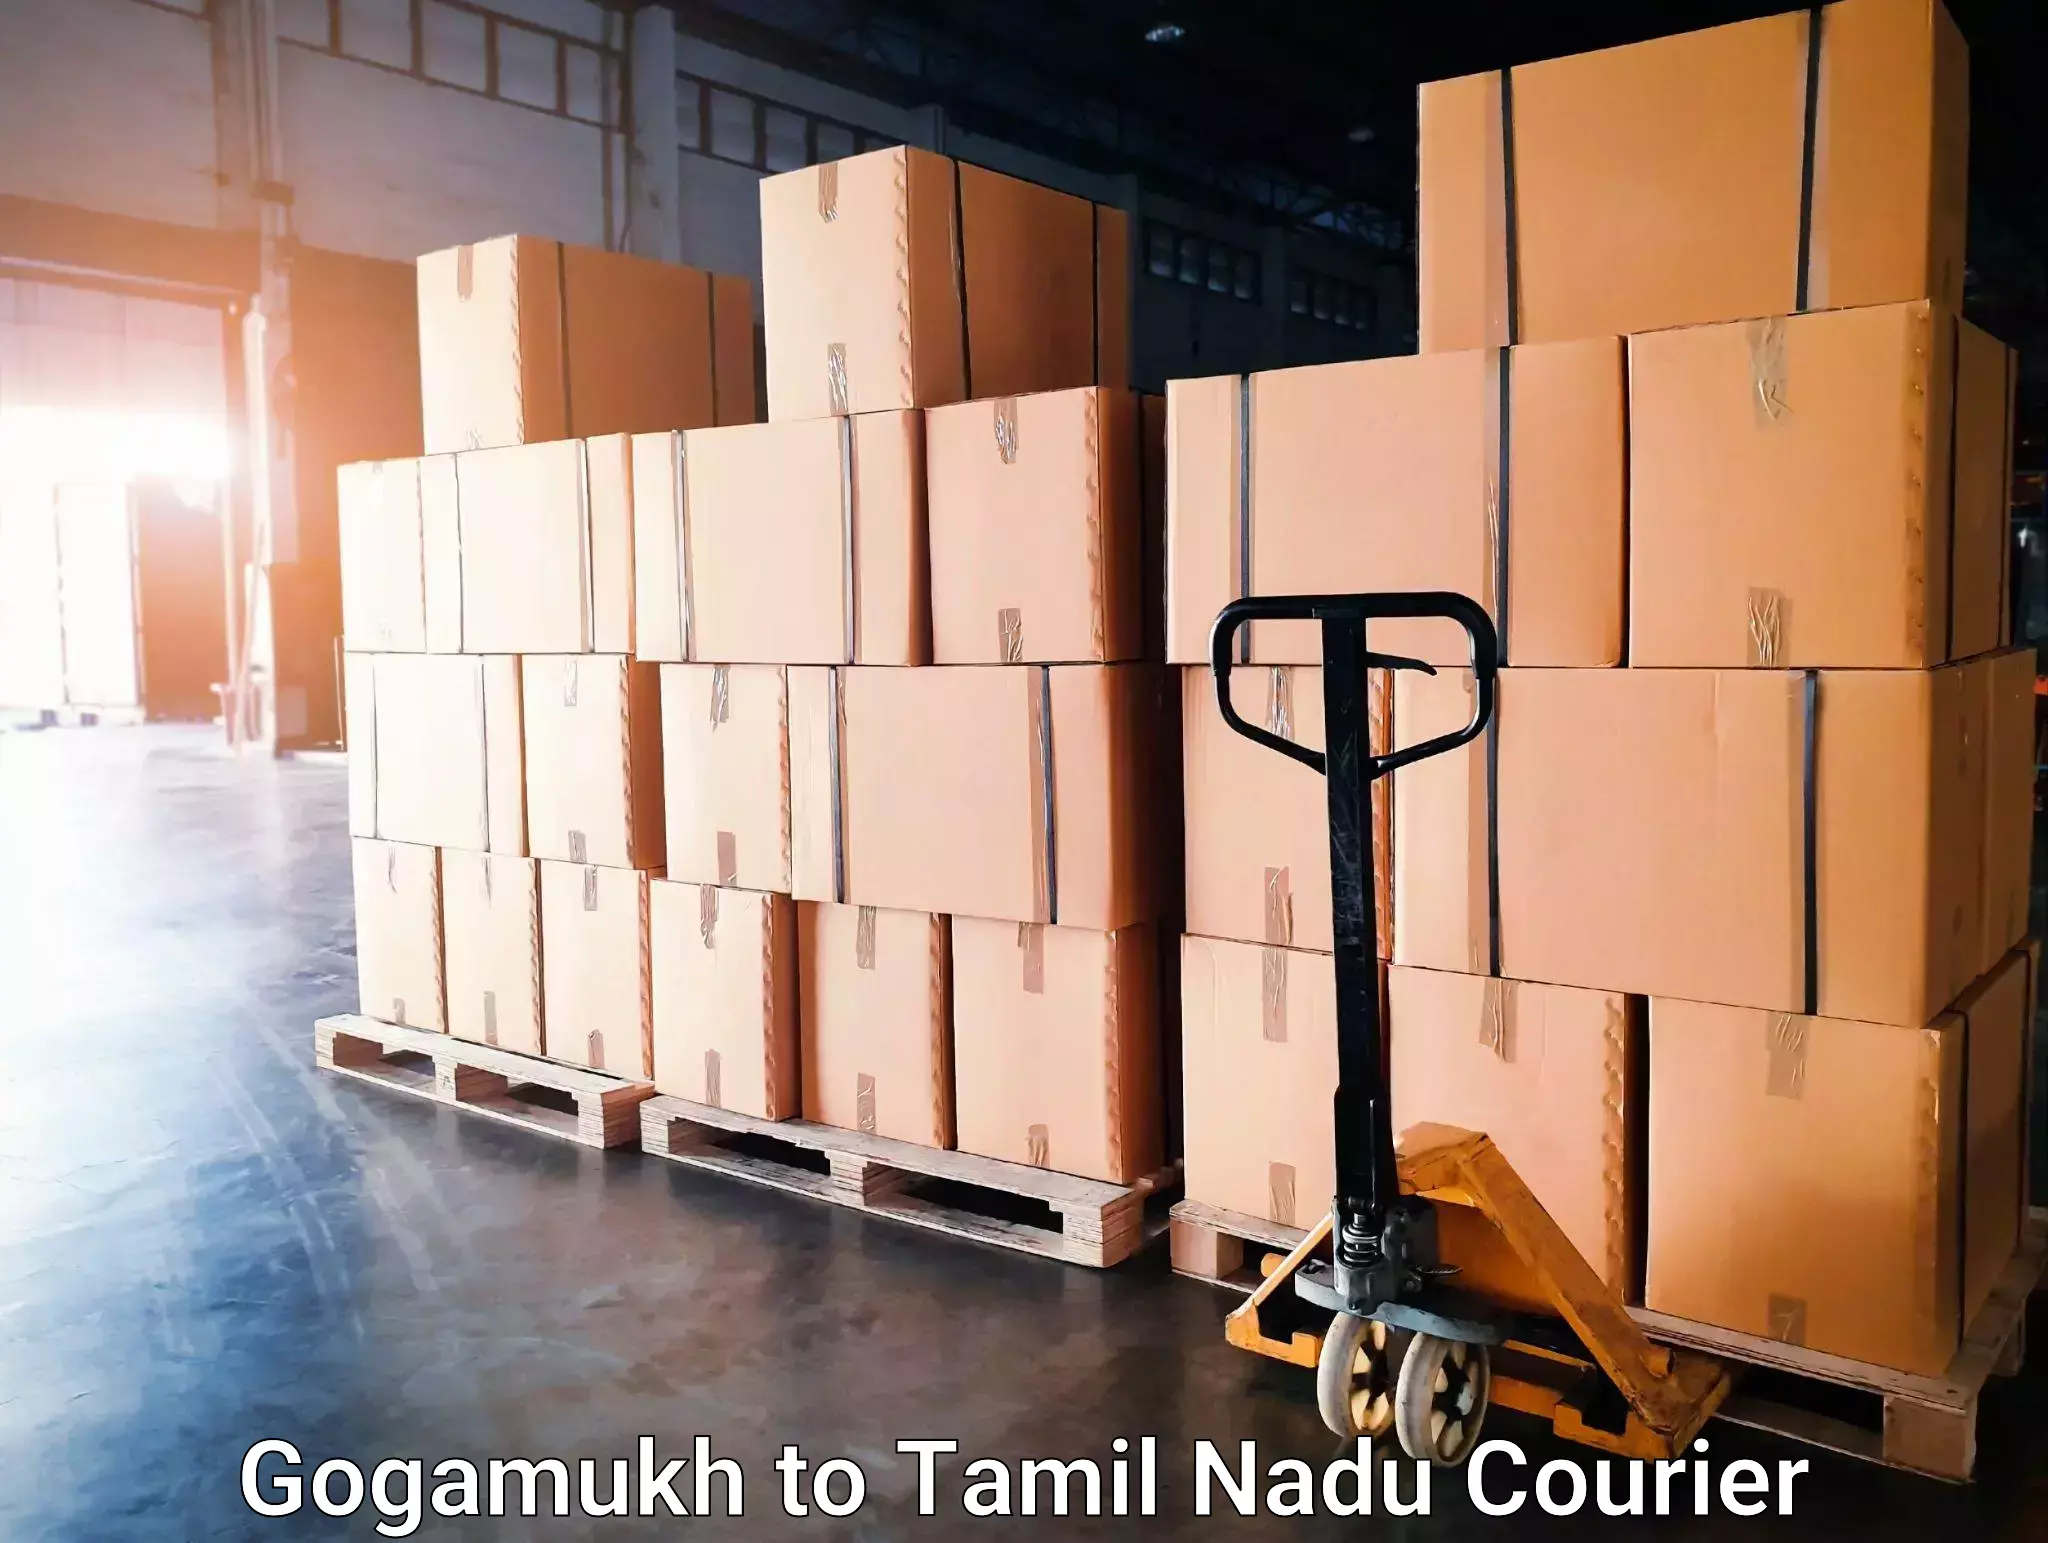 State-of-the-art courier technology in Gogamukh to Tamil Nadu